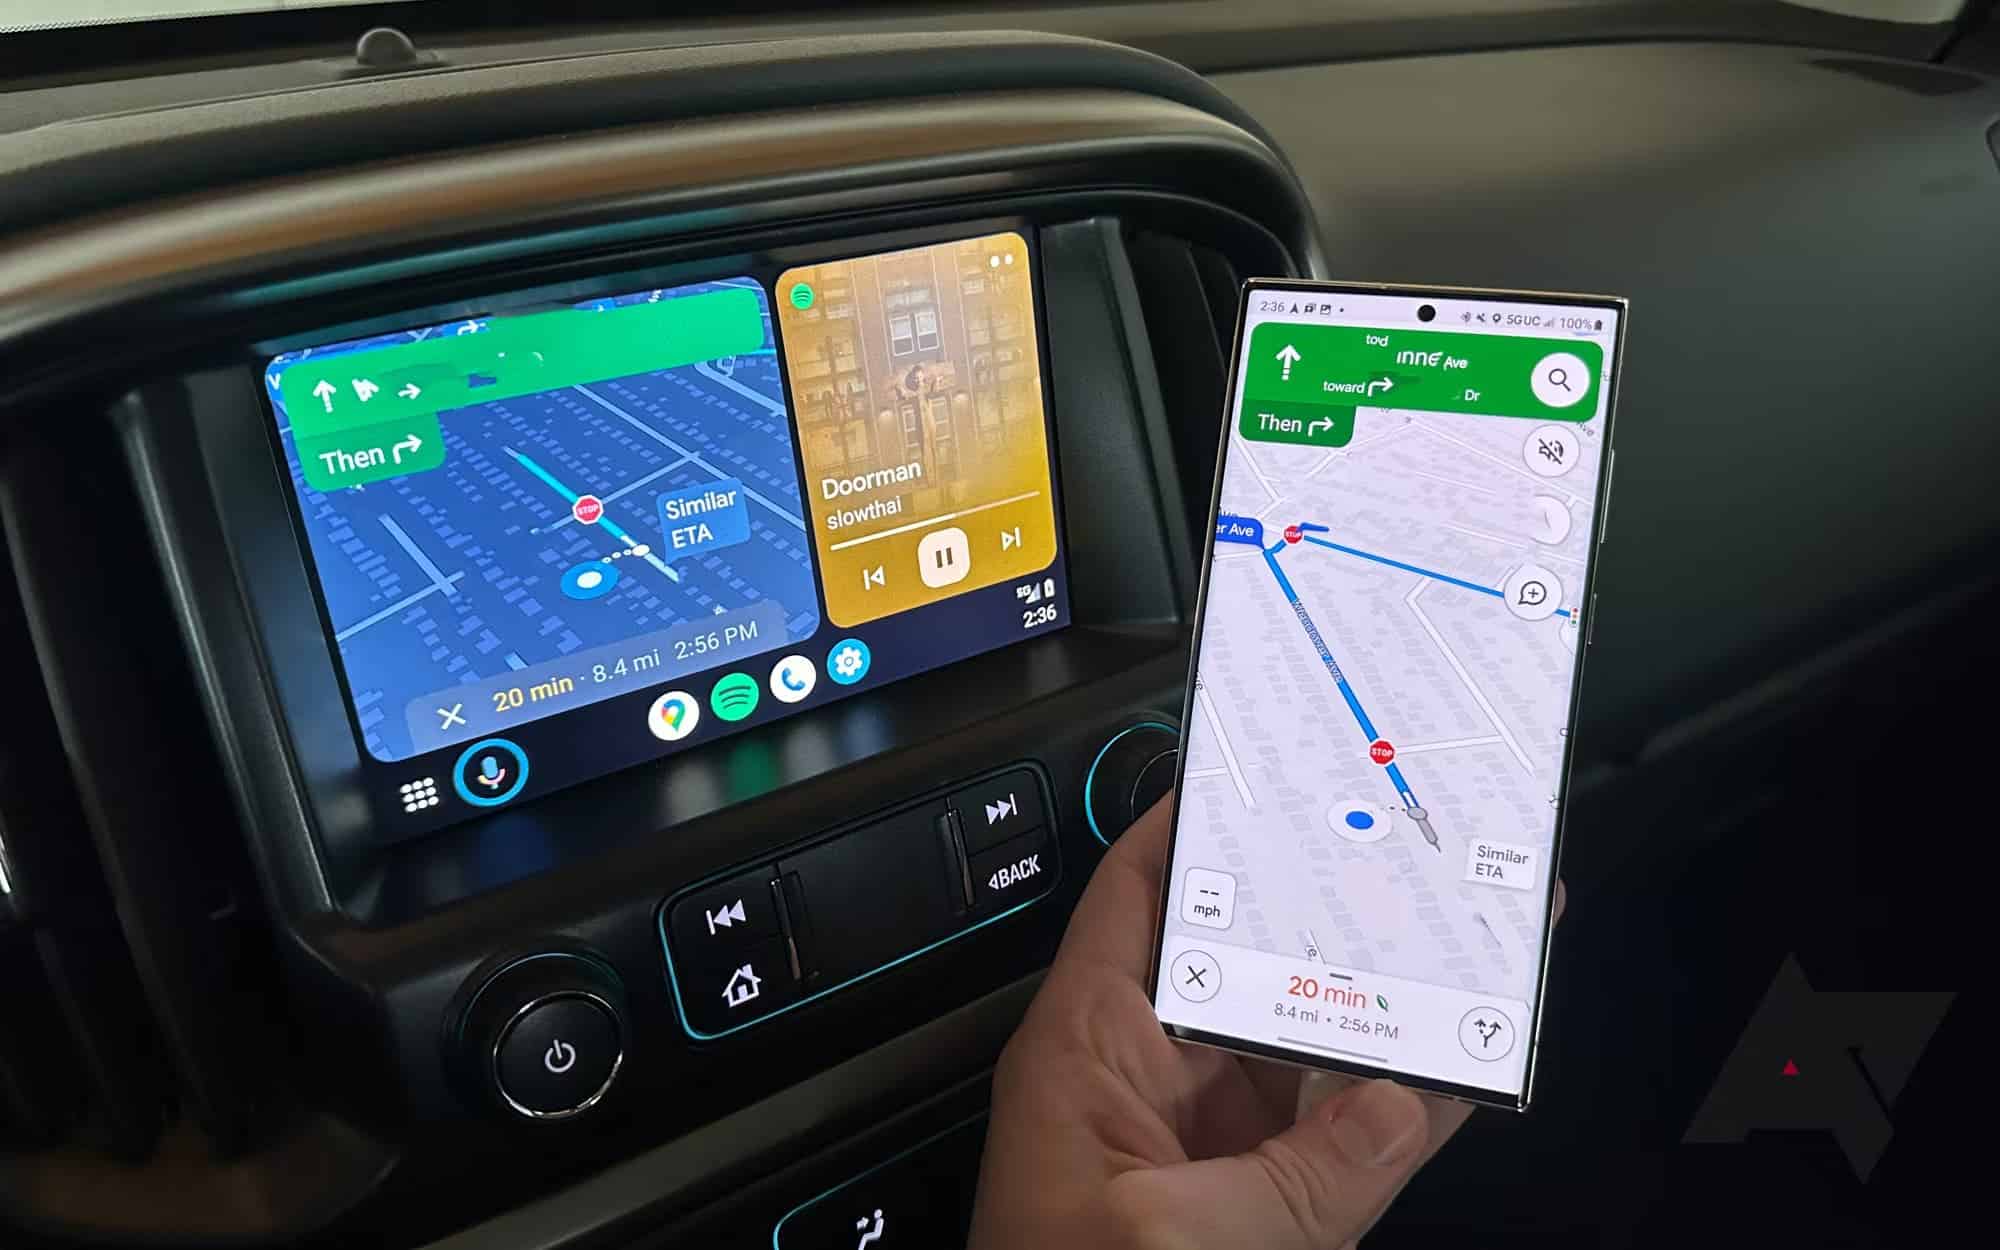 https://www.gizchina.com/wp-content/uploads/images/2023/07/Android-Auto-Integration.jpg